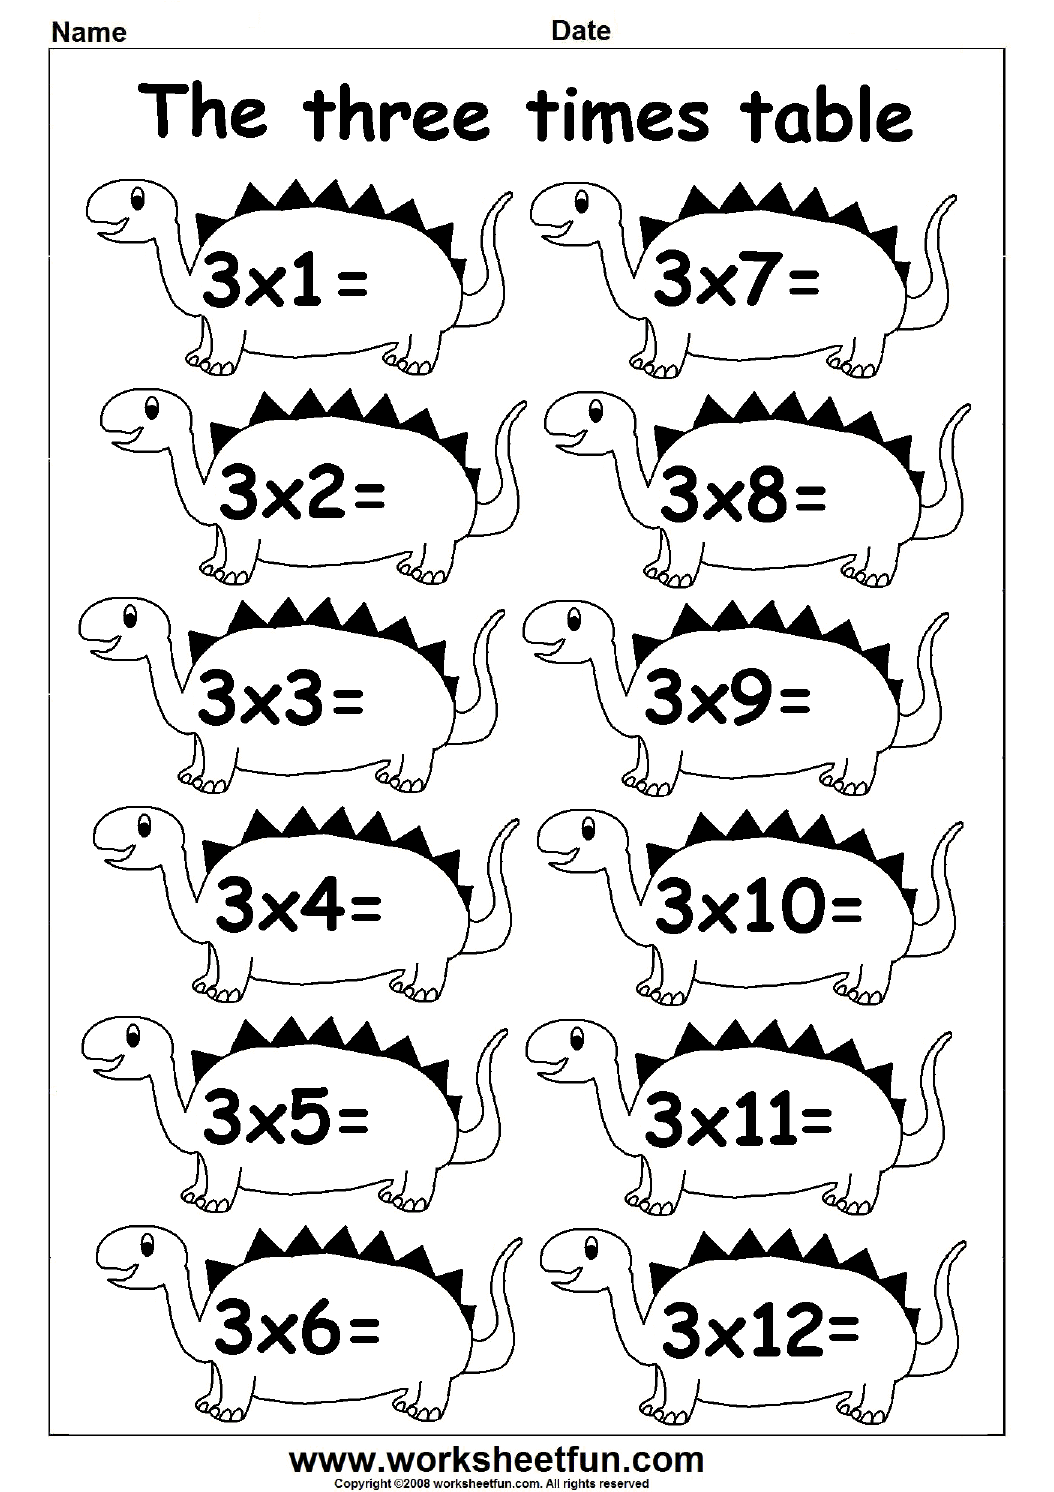 multiplication-times-tables-worksheets-2-3-4-5-times-tables-four-worksheets-free